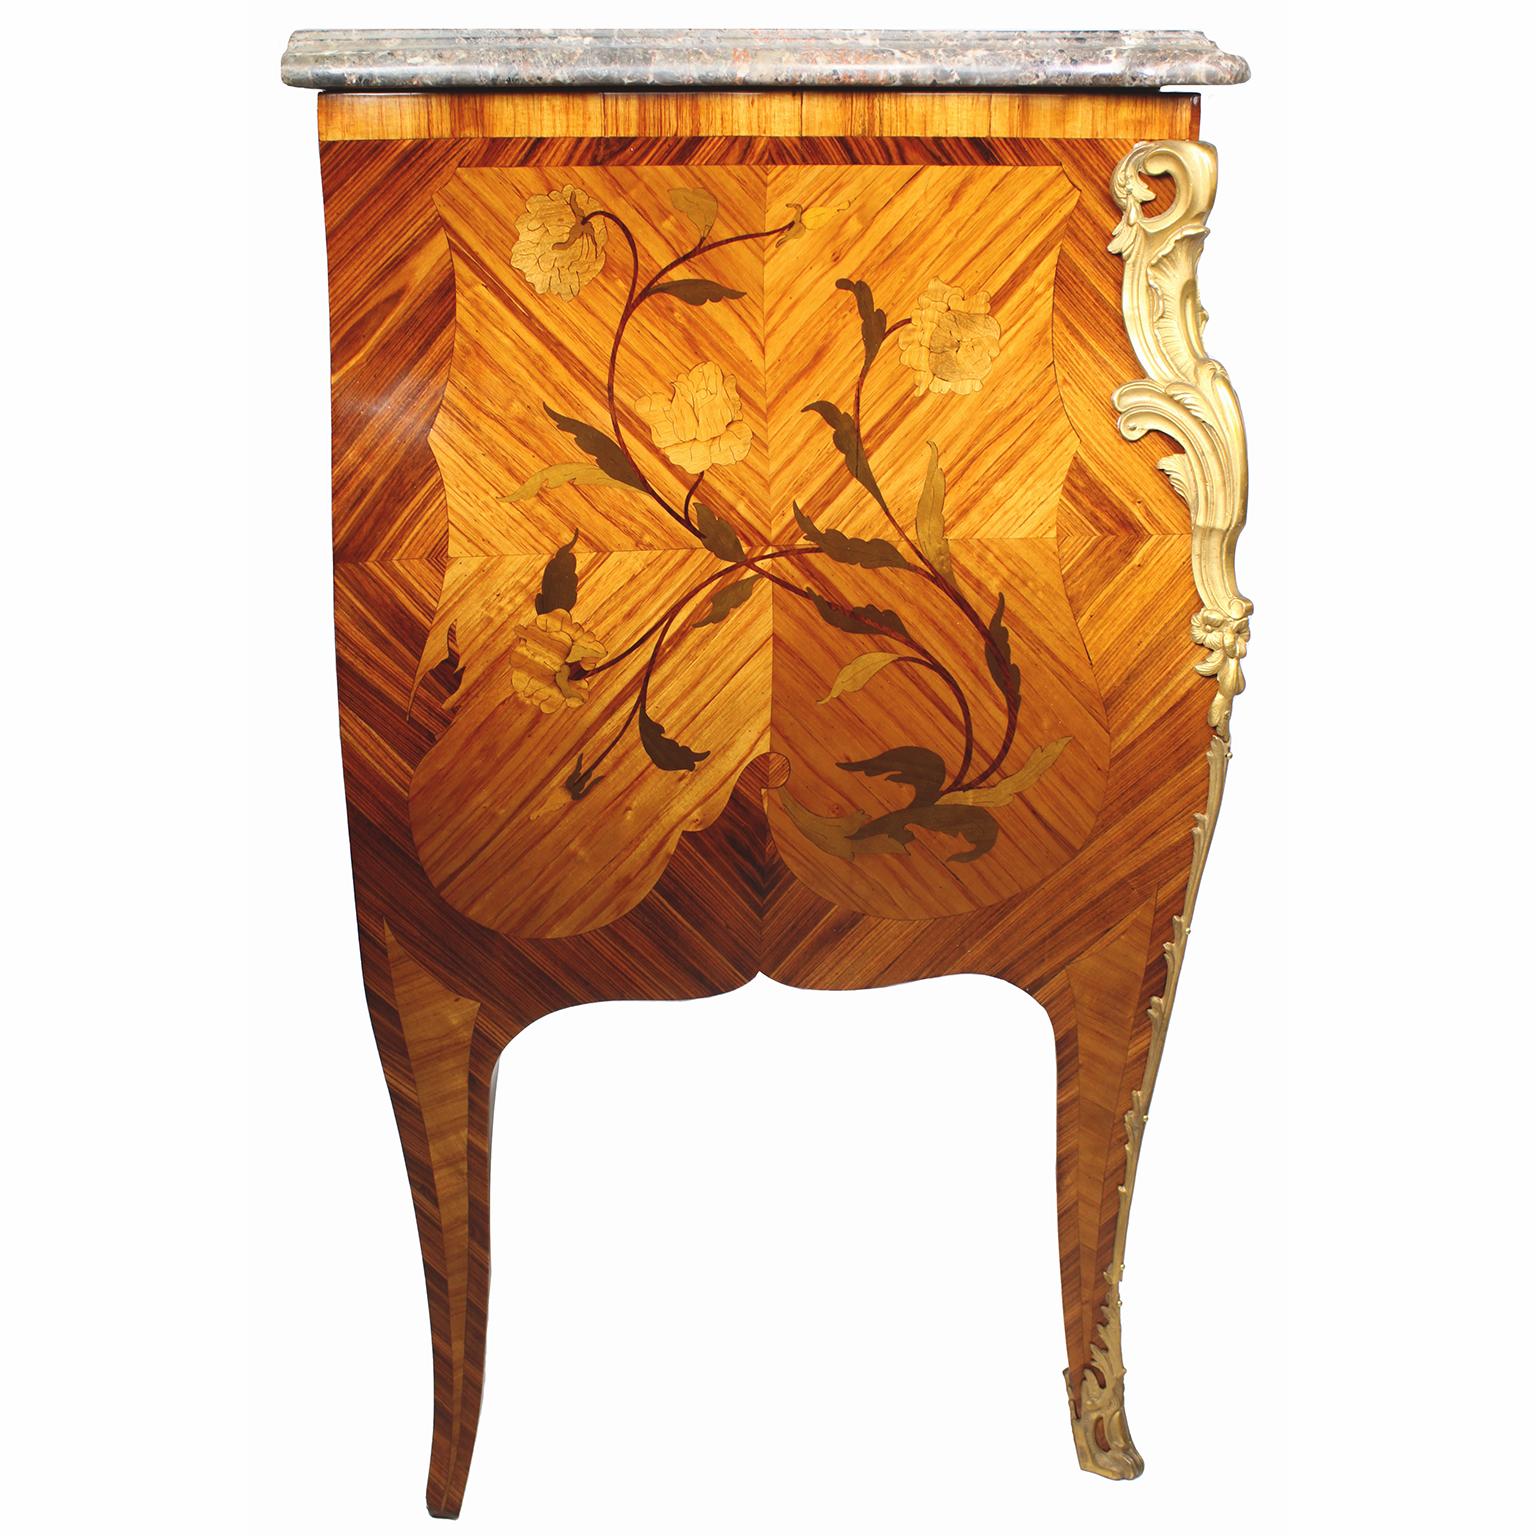 French Louis XV Style Bombé Satinwood Marquetry & Ormolu Mounted Commode For Sale 2